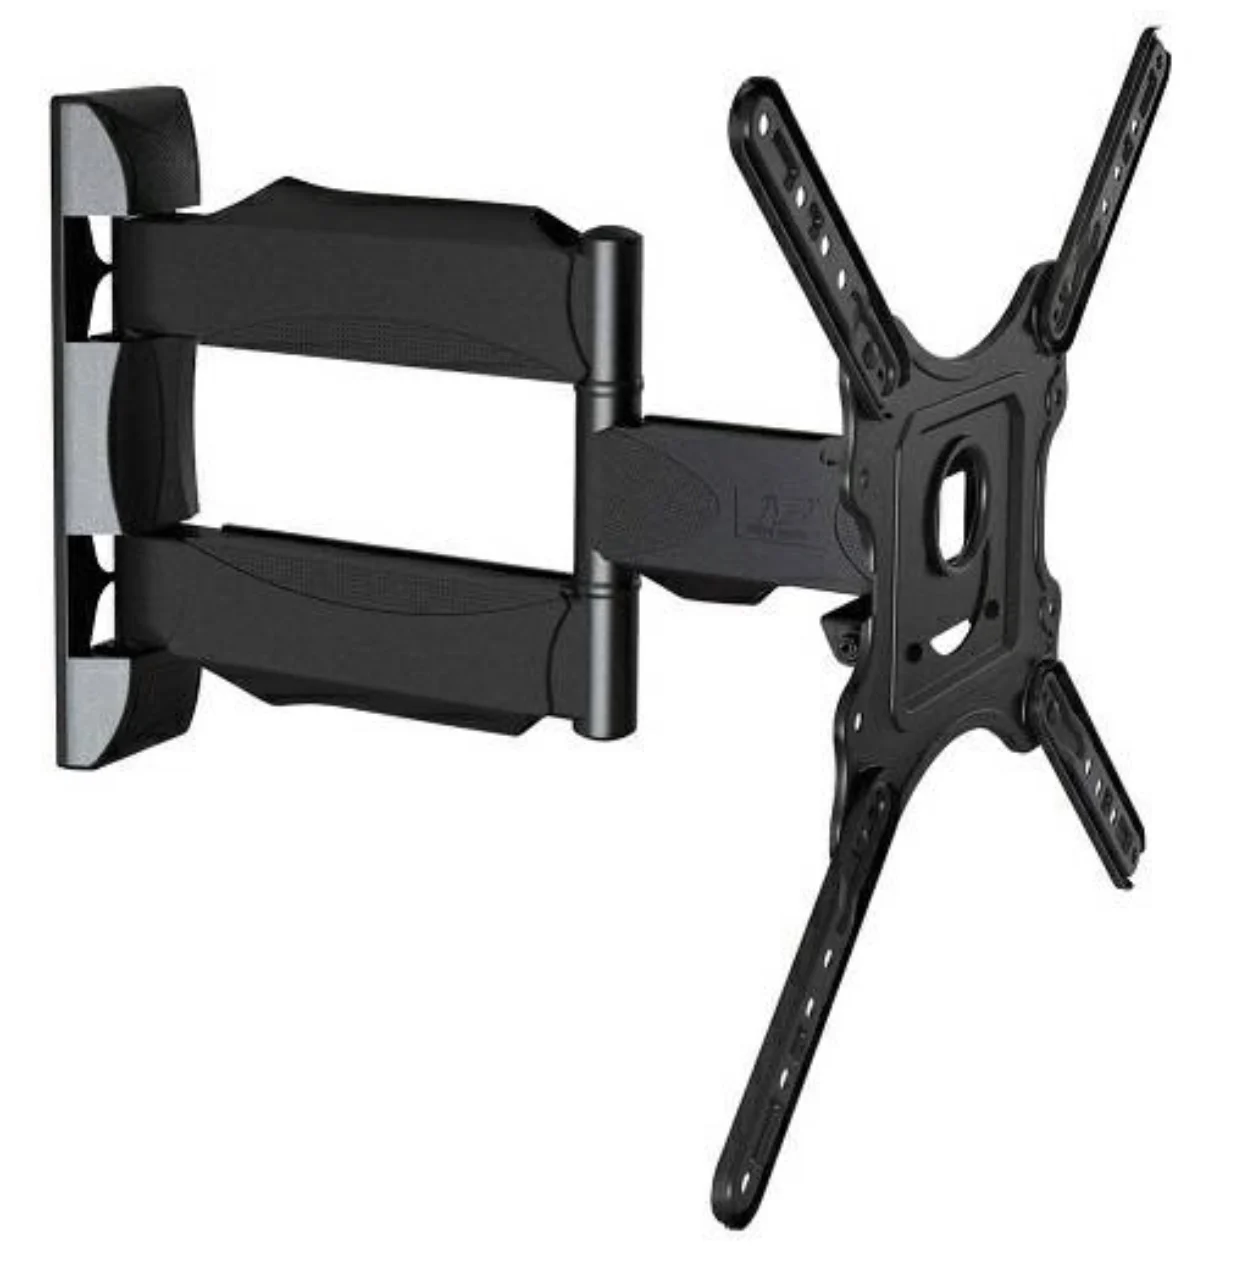 

Tilt Swivel Arm TV Wall Mount for 32 to 55 inch Flat Curved Screen, Black